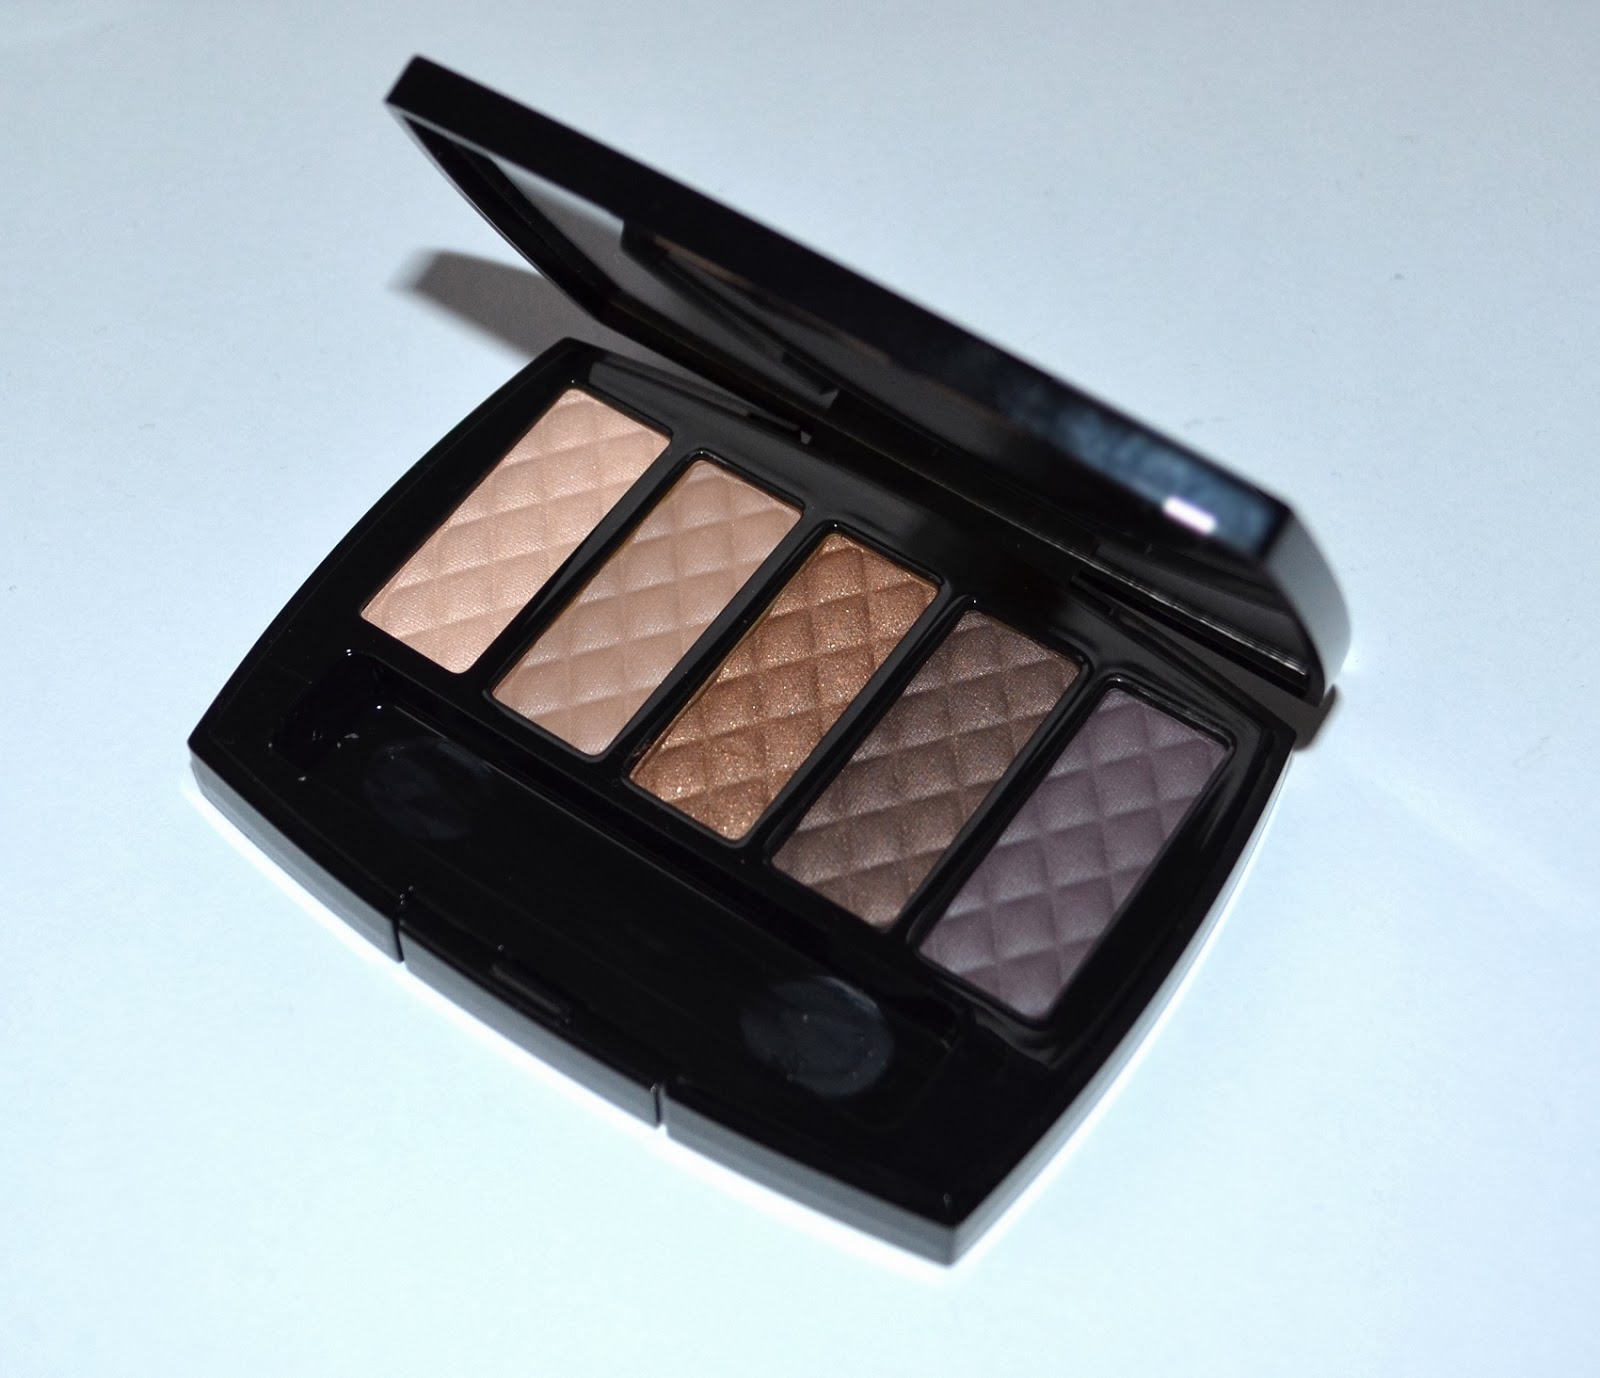 Chanel Ombres Matelassees Charming Eye Shadow Palette from Nuit Infinie de Chanel  Holiday 2013 Collection